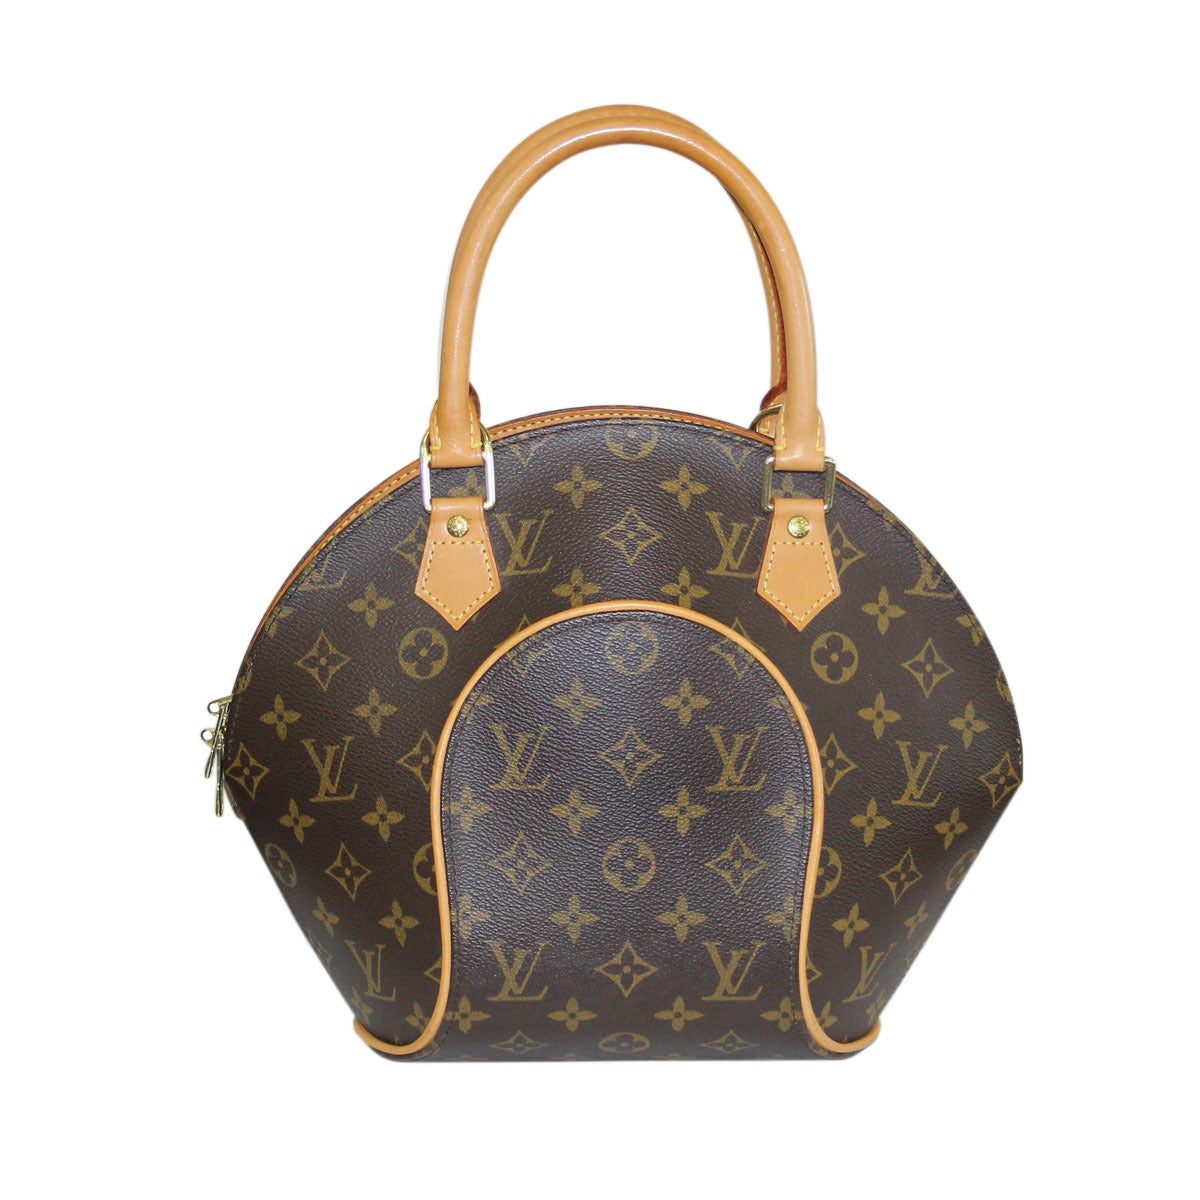 Company: Louis Vuitton
Handles: Cowhide Leather Top Rolled Handles; Drop: 4.25